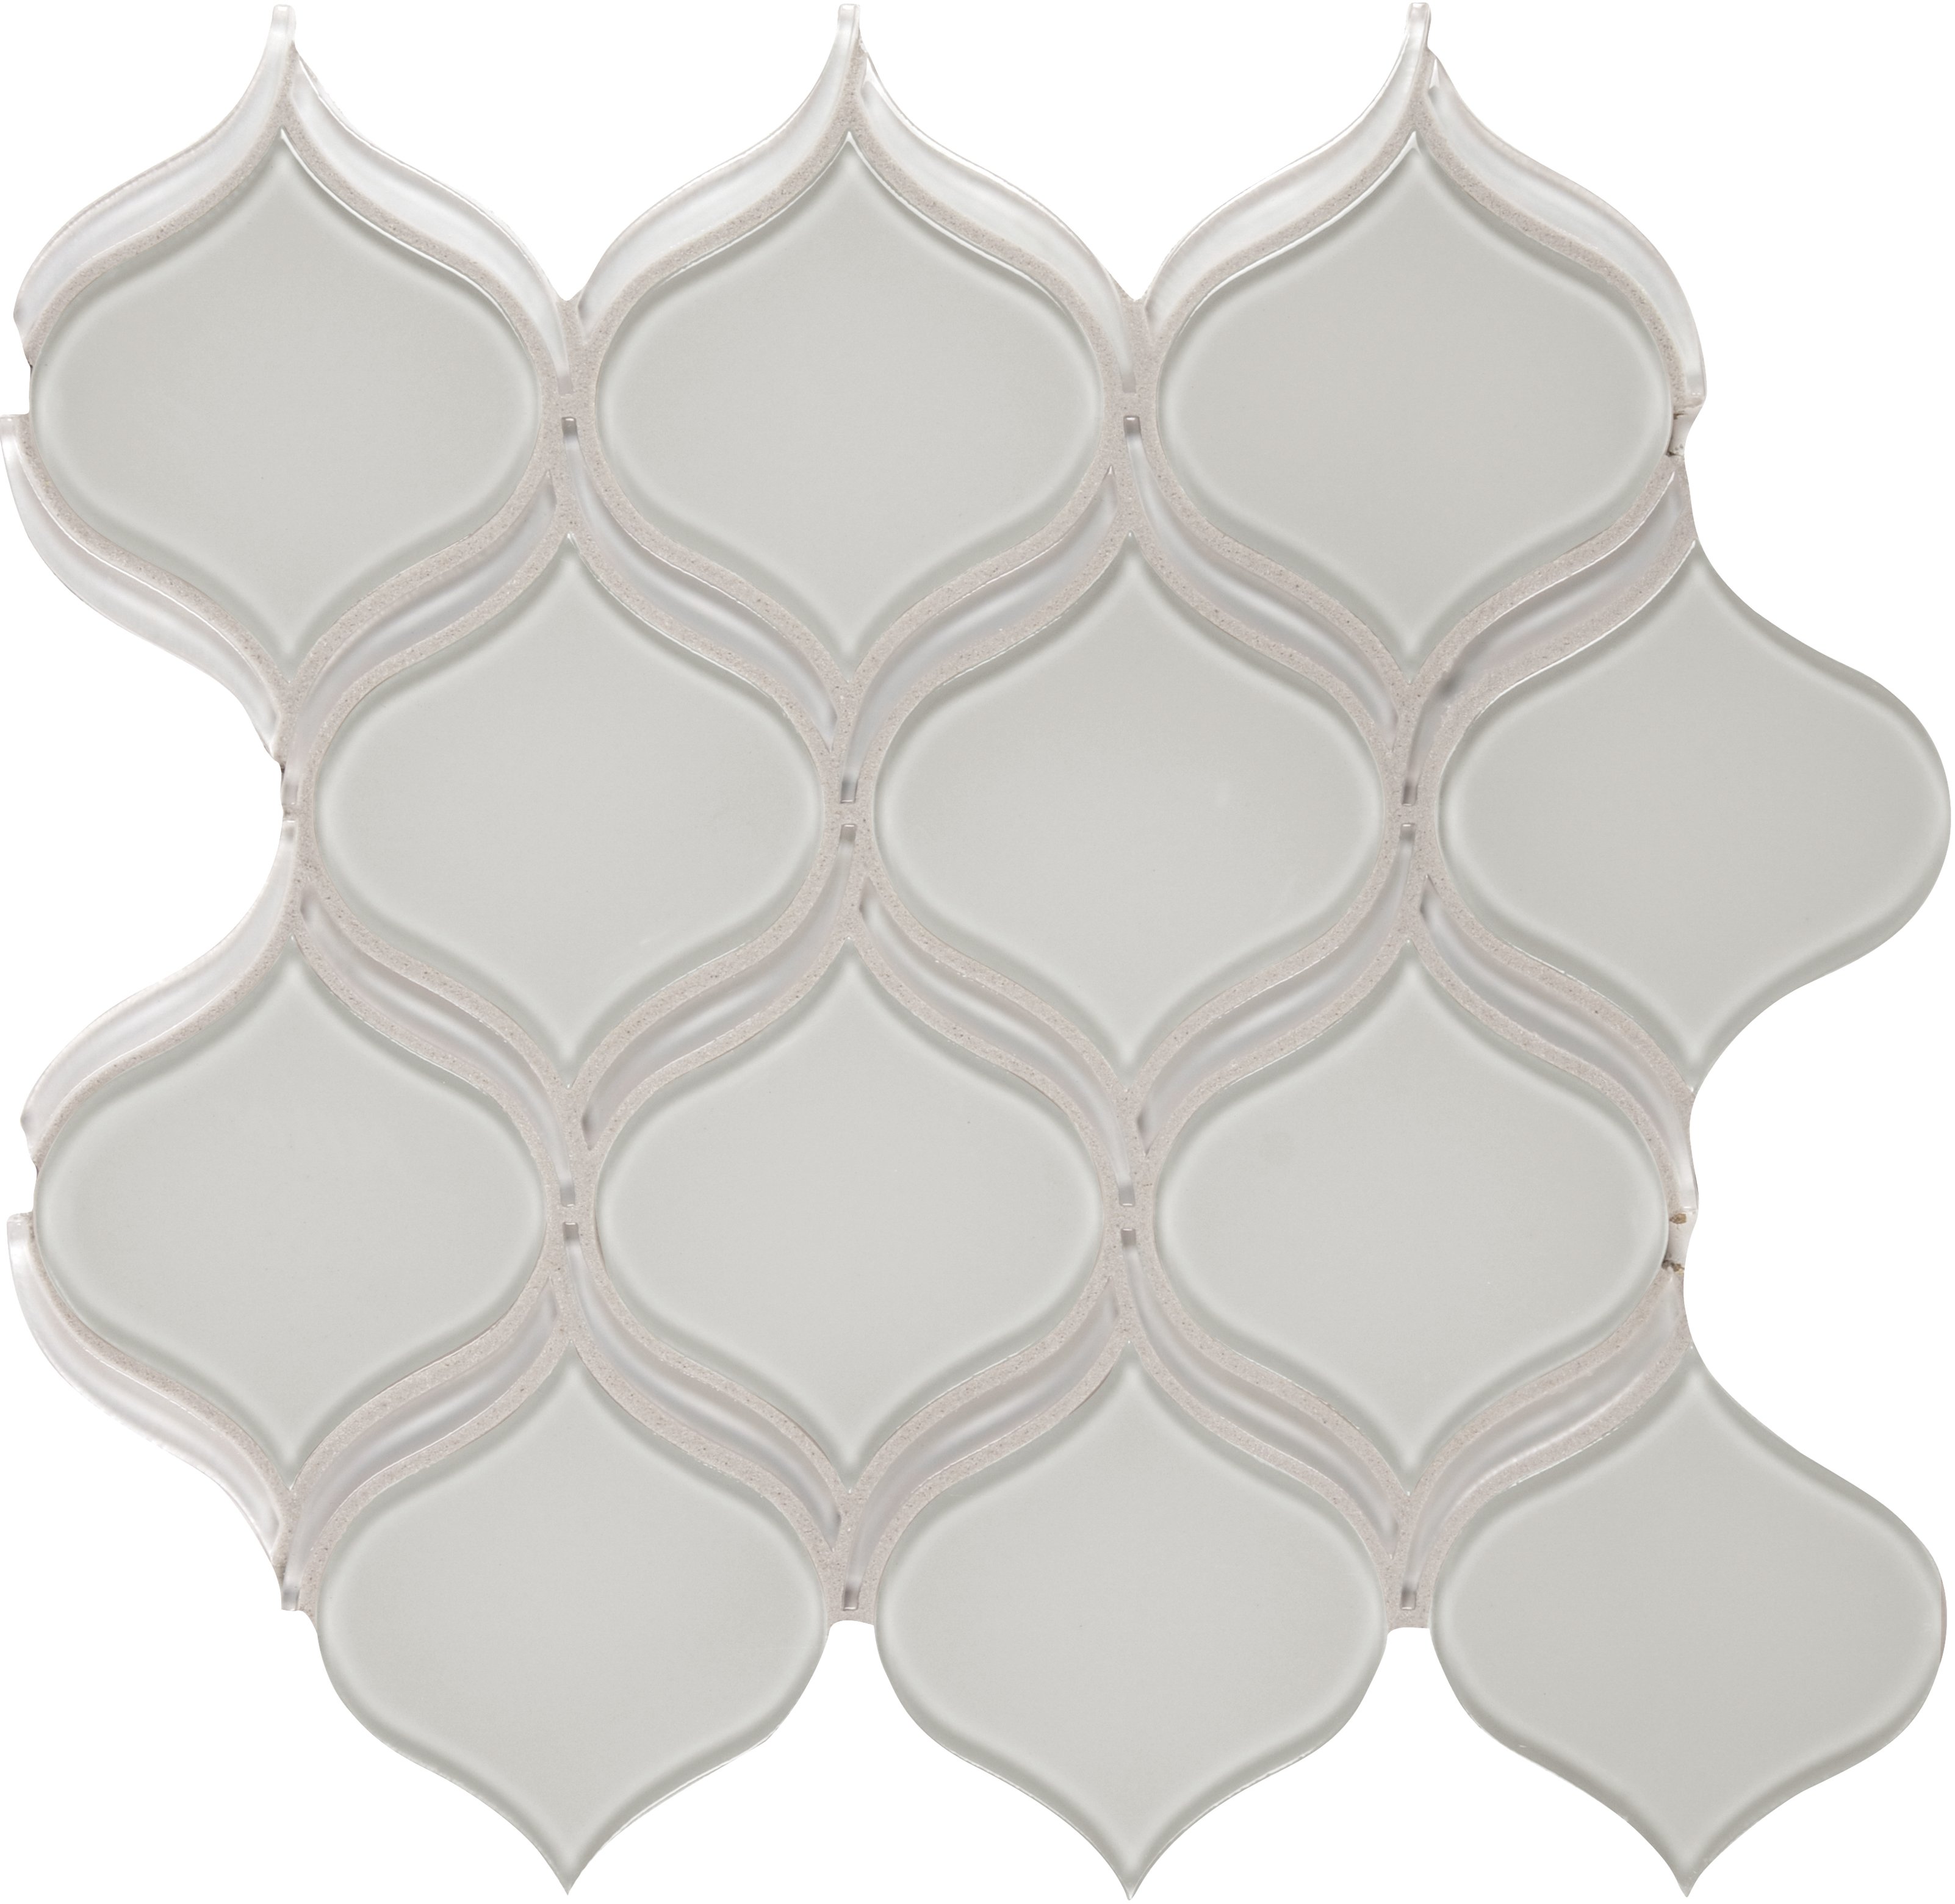 mist arabesque pattern fused glass mosaic from element anatolia collection distributed by surface group international glossy finish rounded edge mesh shape